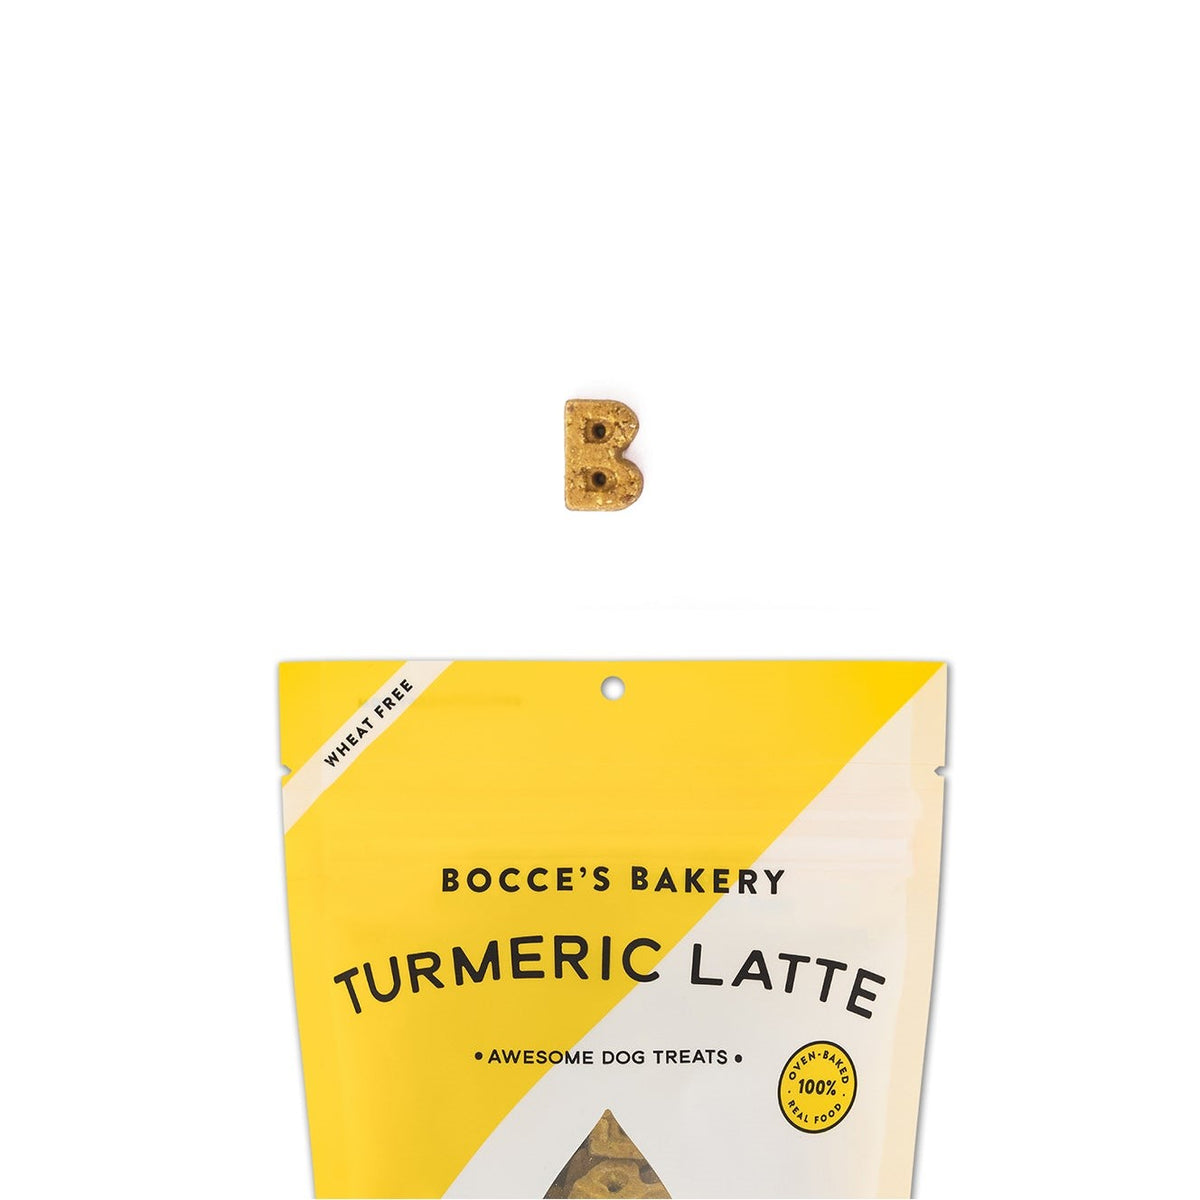 Boccee's Turmeric Latte Biscuits 5oz (142g)